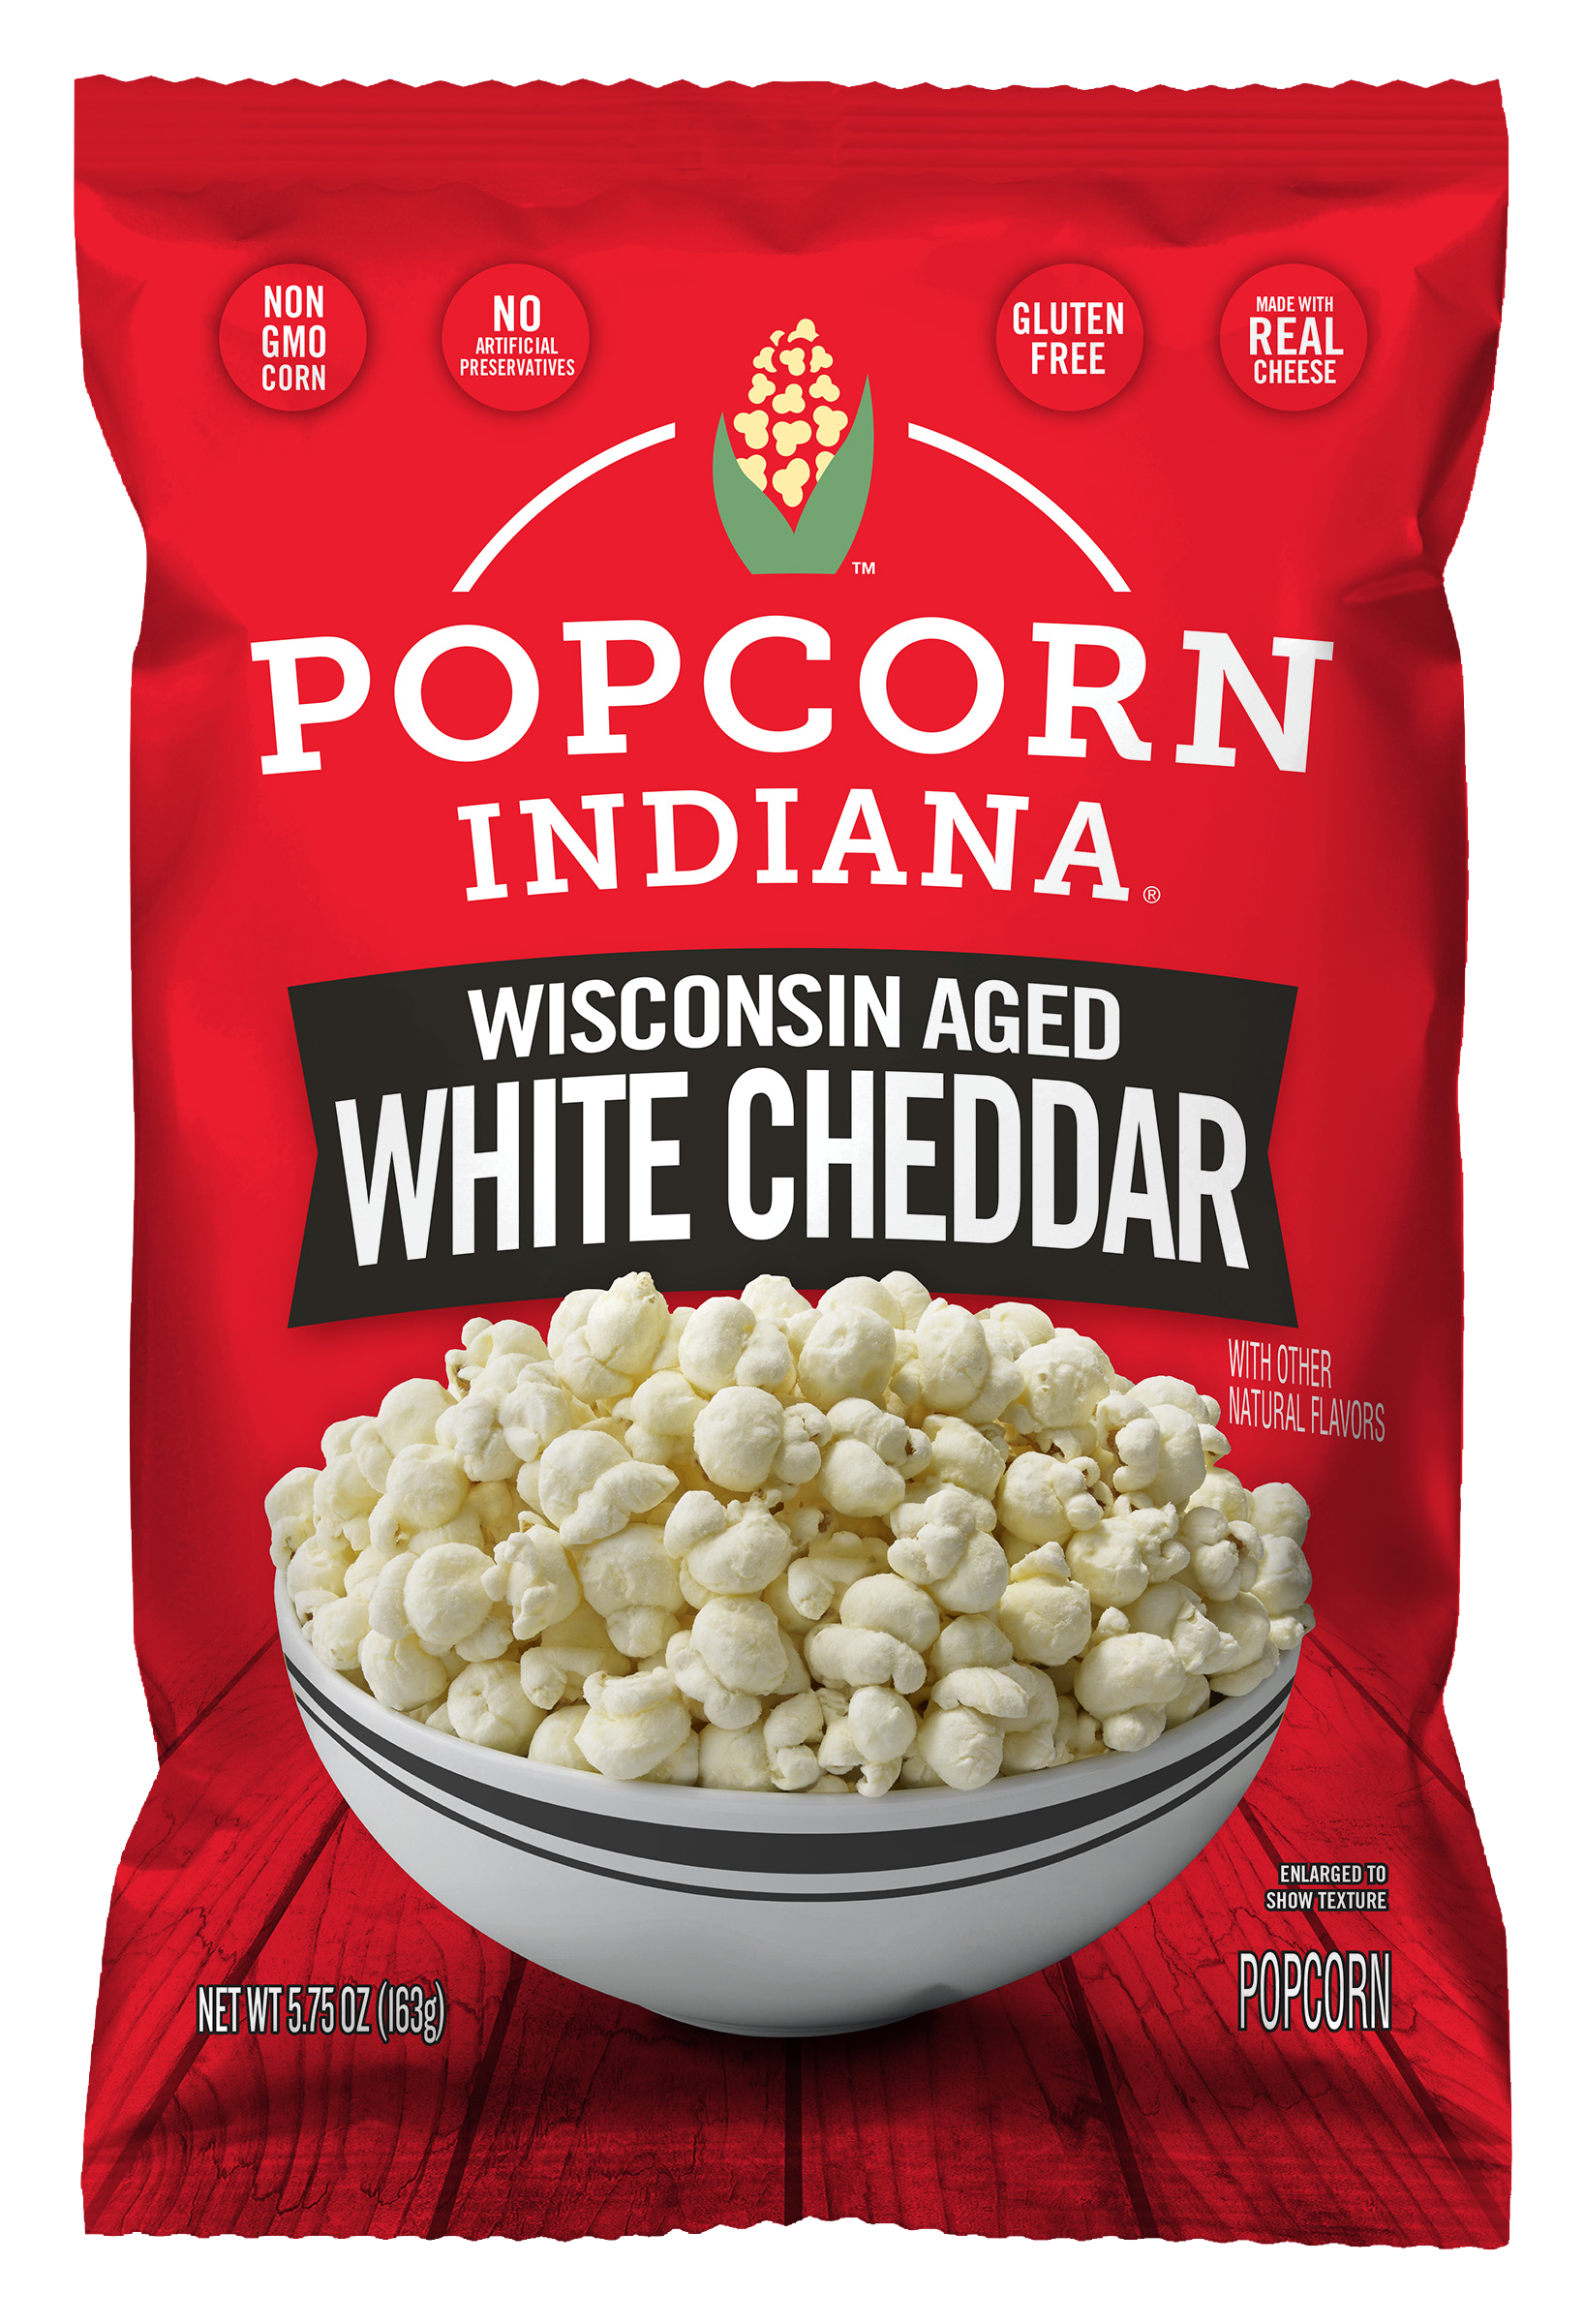 Wisconsin Aged White Cheddar package